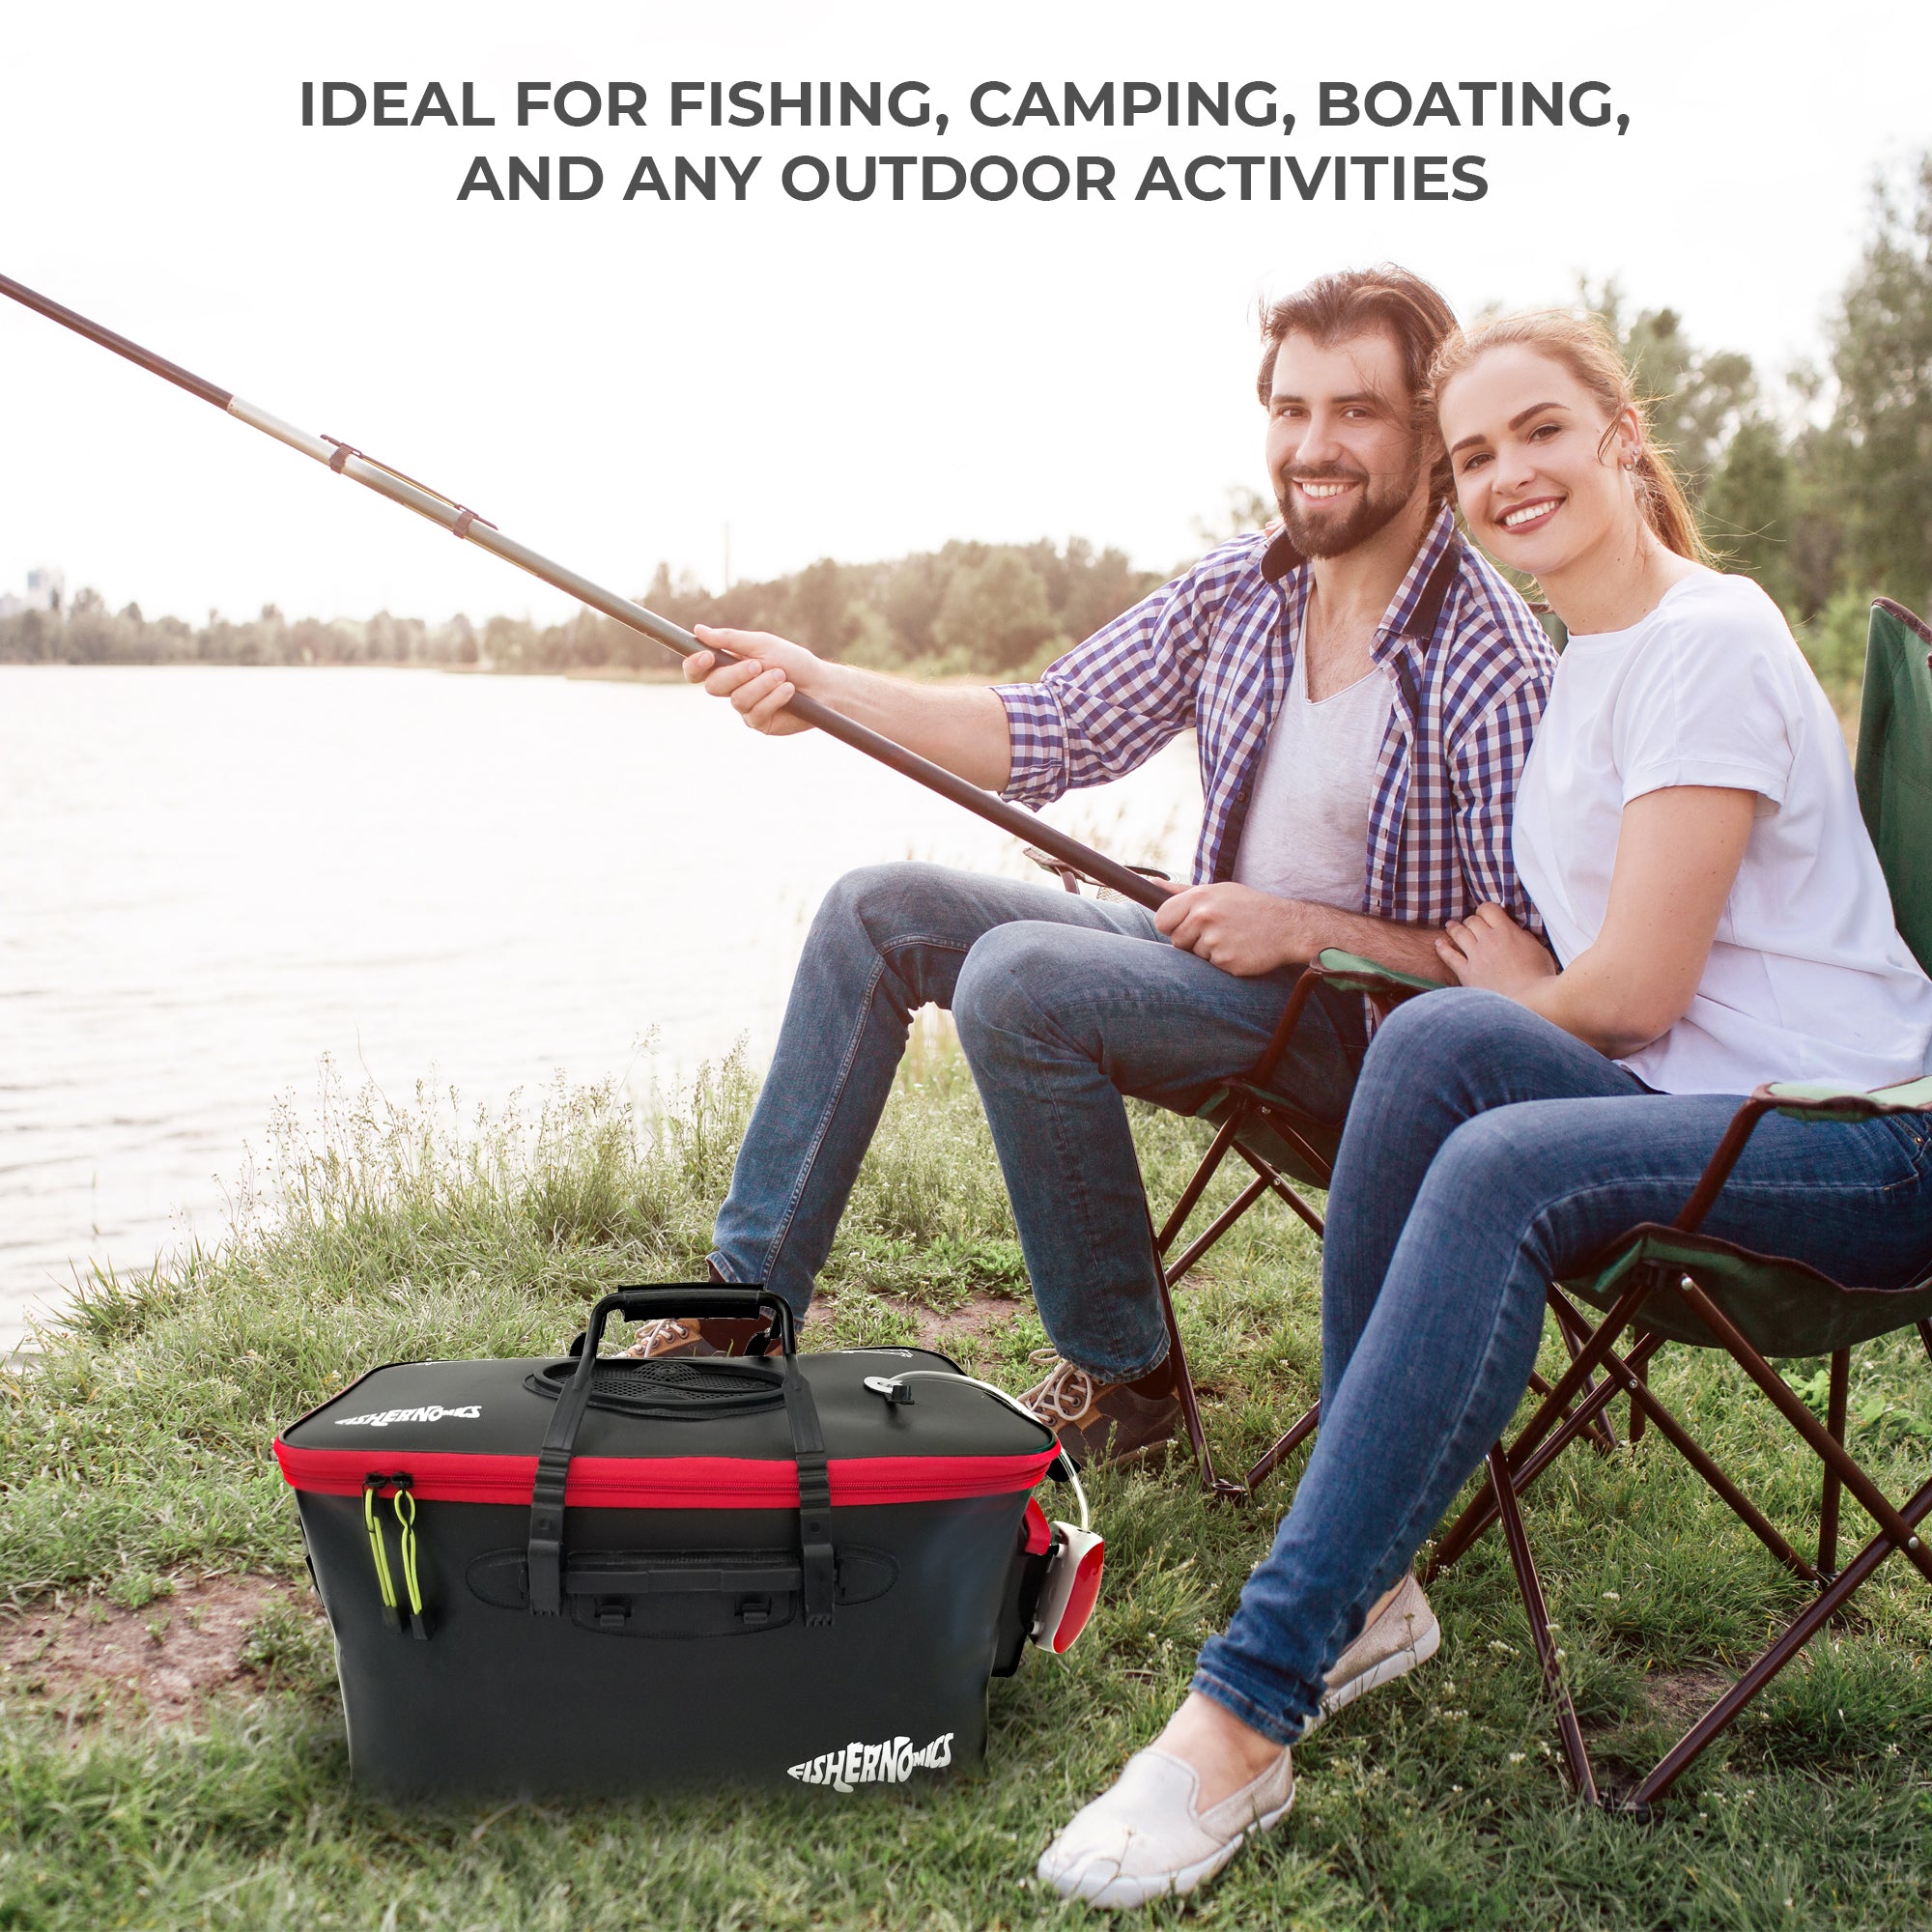 Cheers.US Portable Fishing Bucket Folding Portable Collapsible